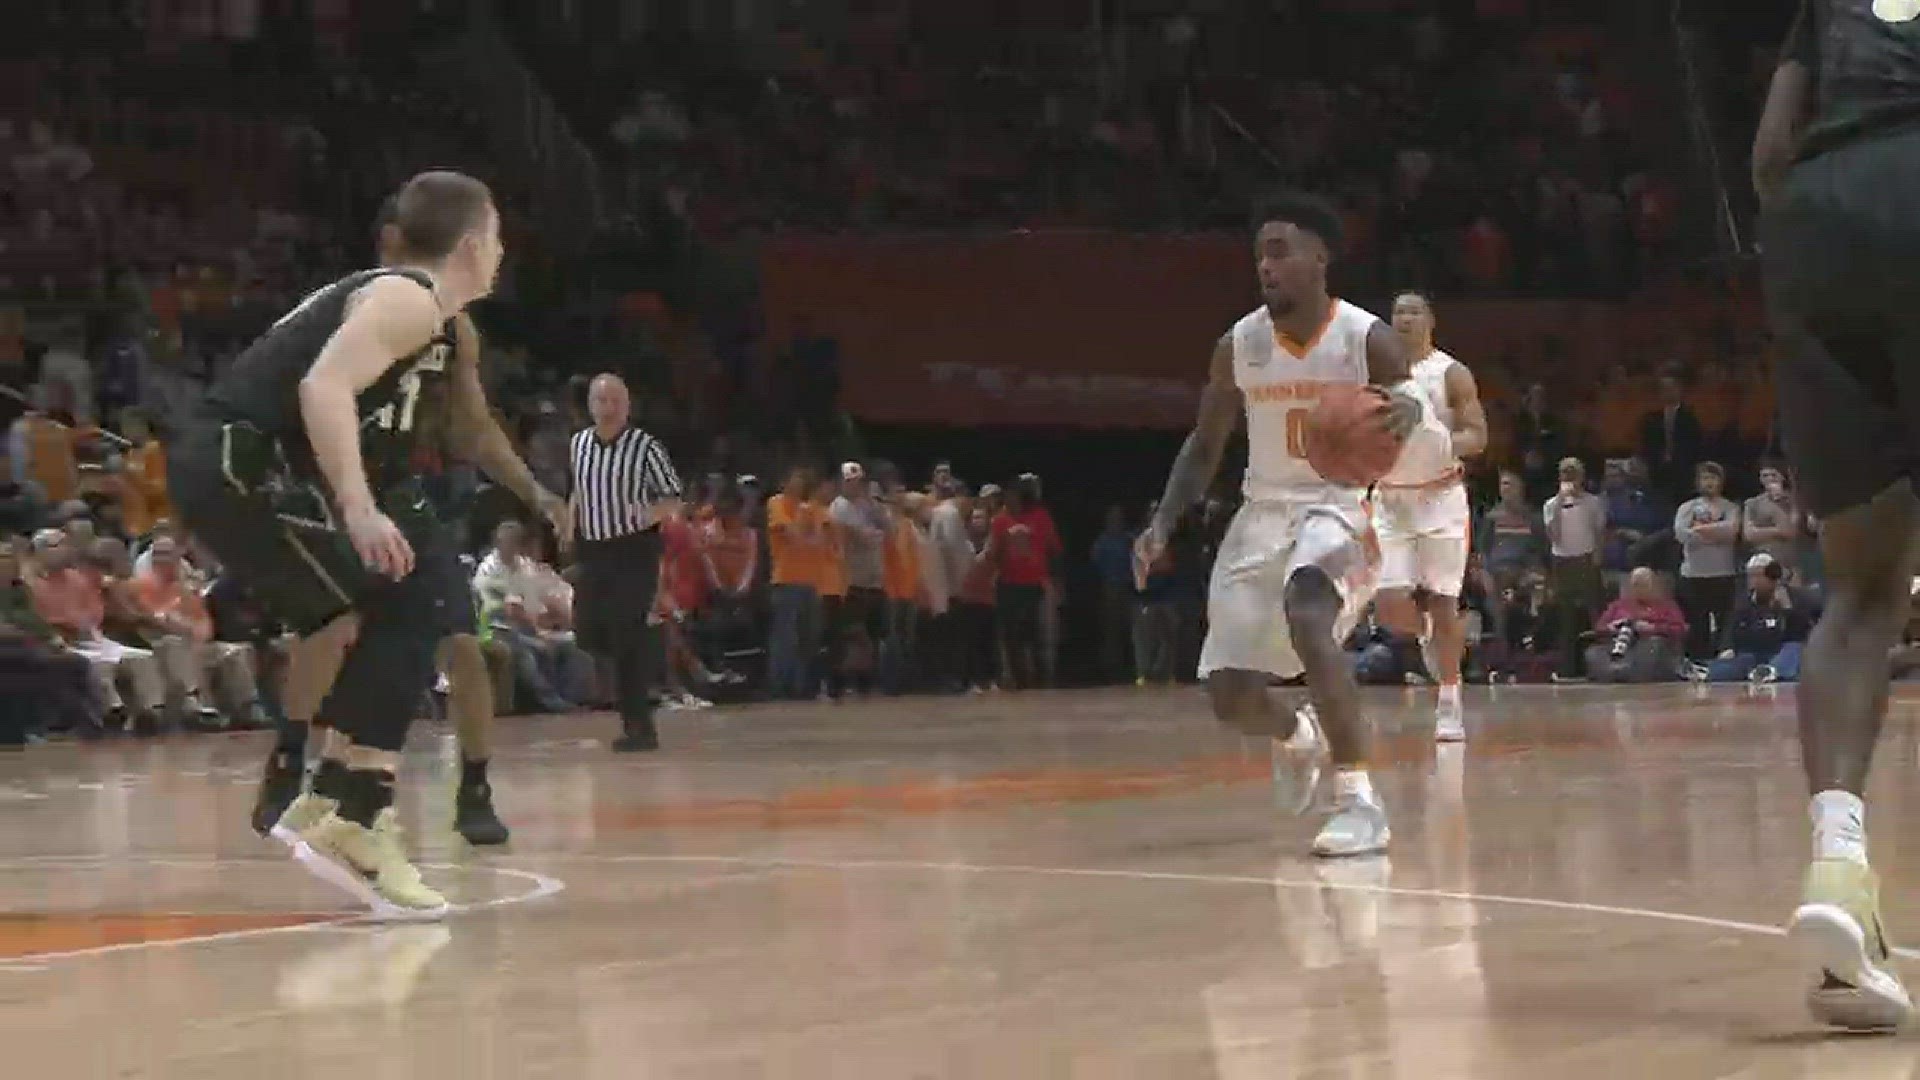 Tennessee jumped out to a 17-point halftime lead then weathered several Vandy runs in the second half to sweep the series for the first time in five years. Knoxville native Jordan Bowden led the Vols with 19 points, shooting 5-for-7 from beyond the arc.